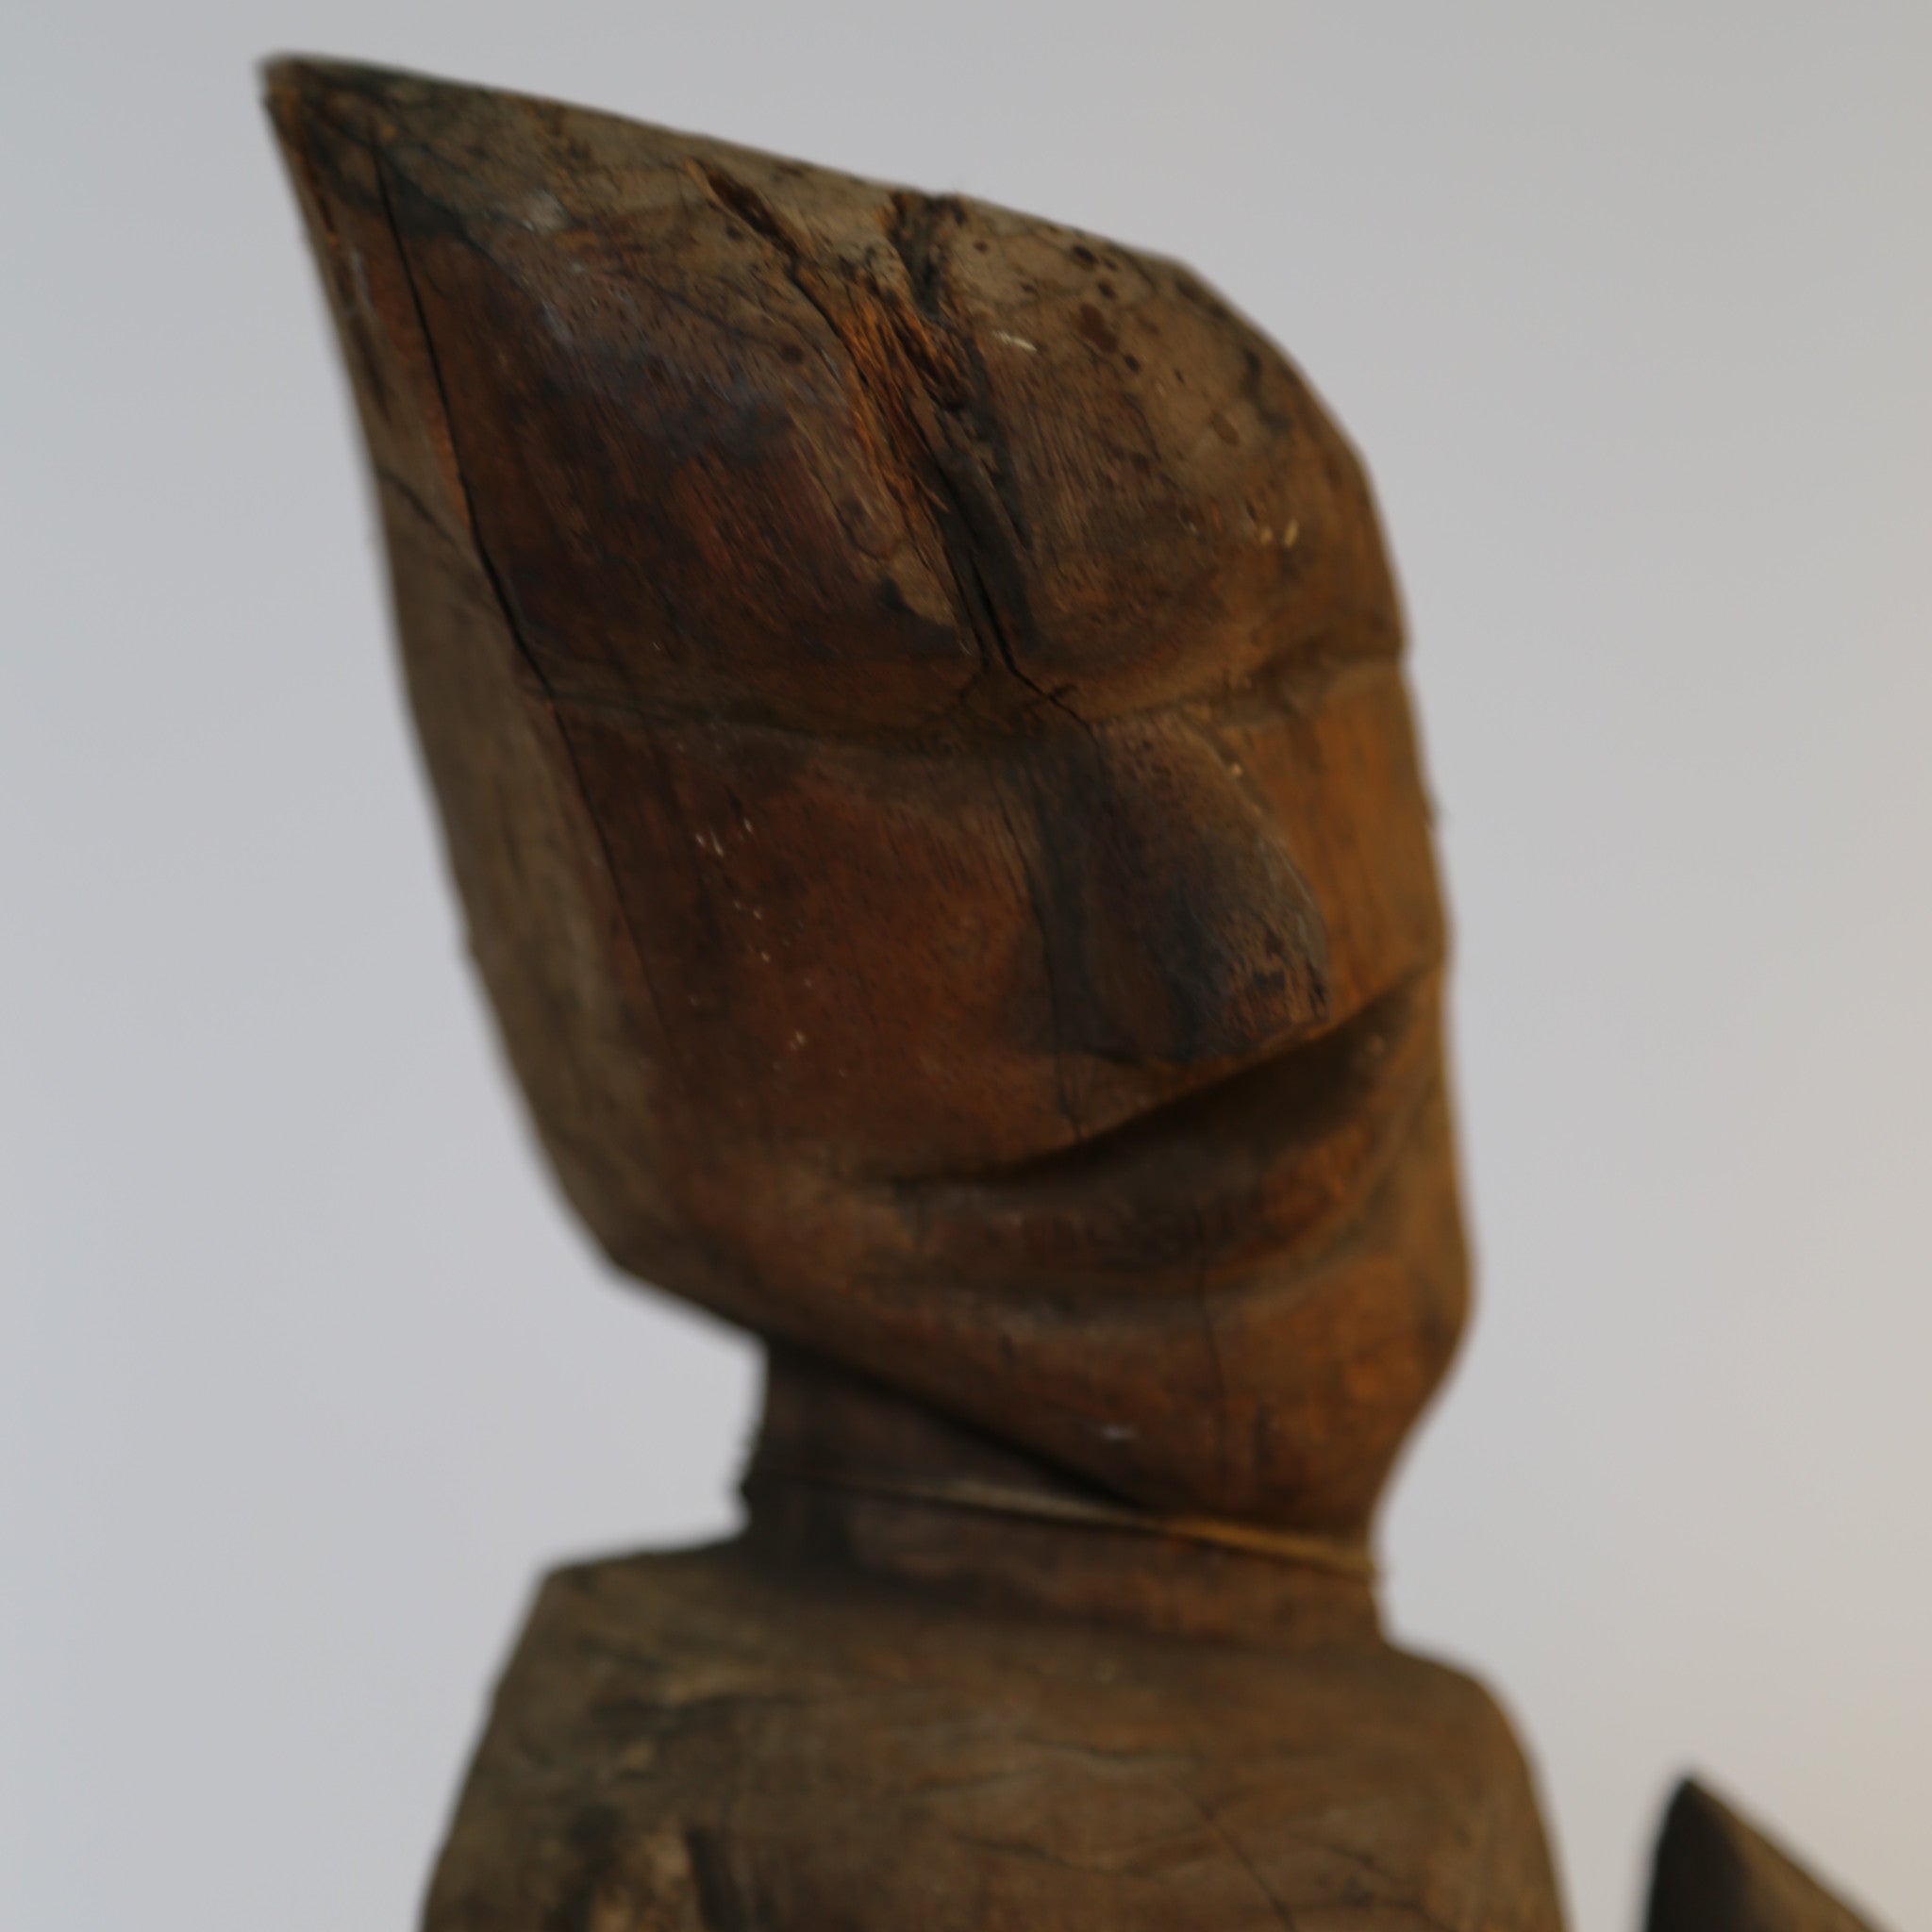 Indonesian Pointy Head Man - Wood Sculpture